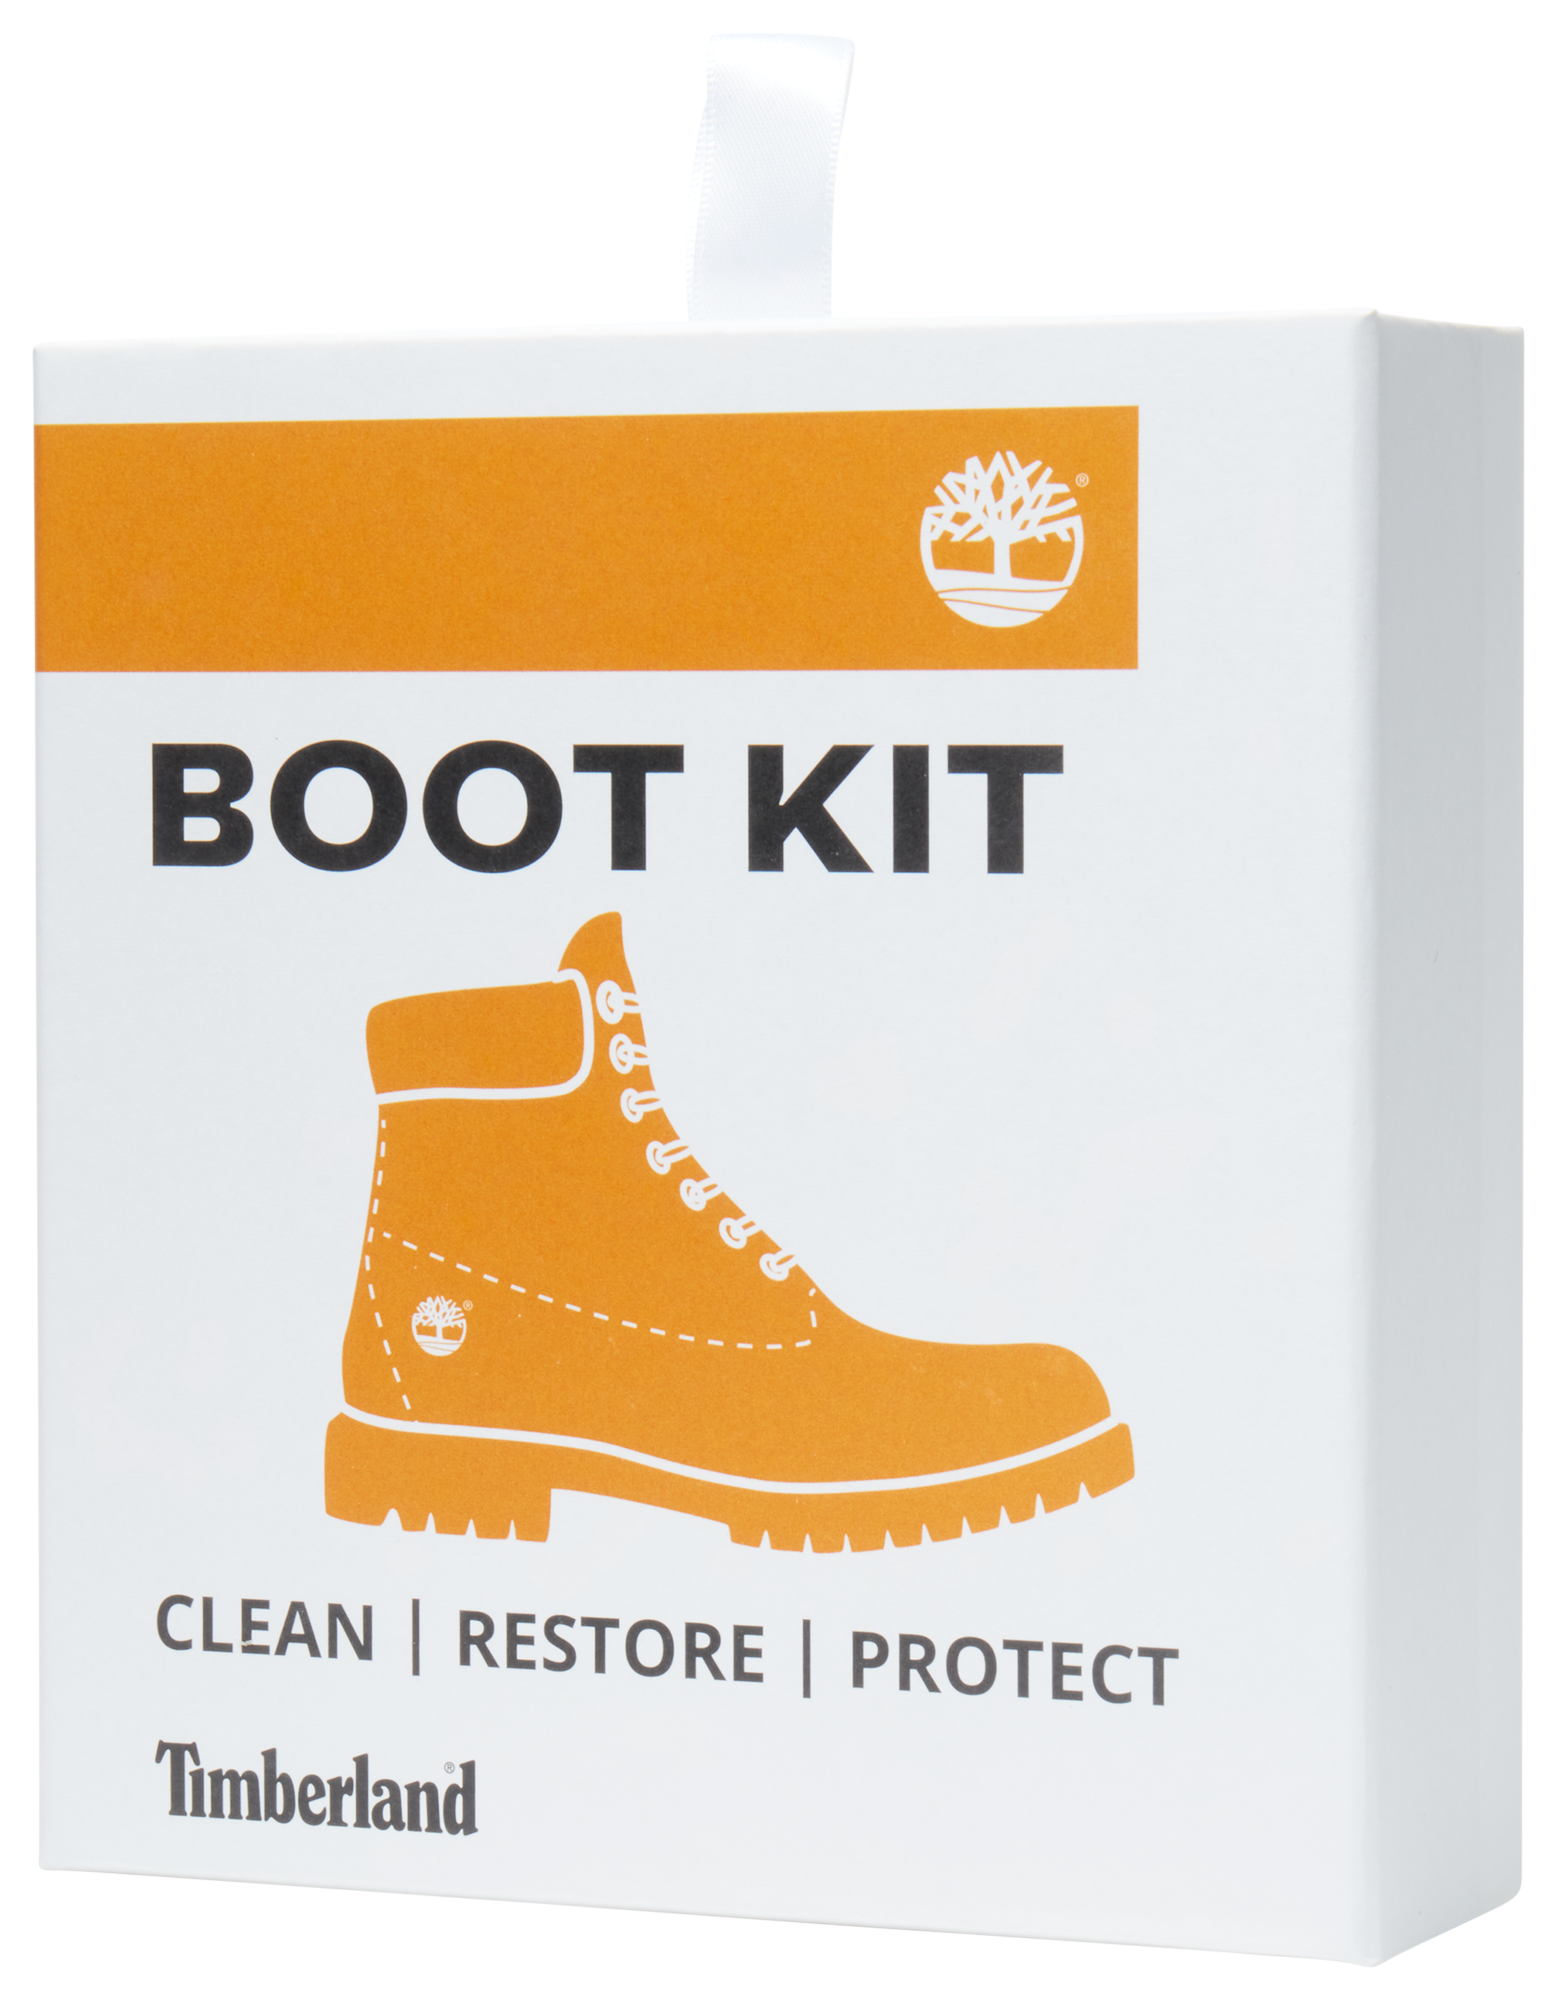 Kit Pour Boots Boot Kit Timberland (2 x 59 ml)